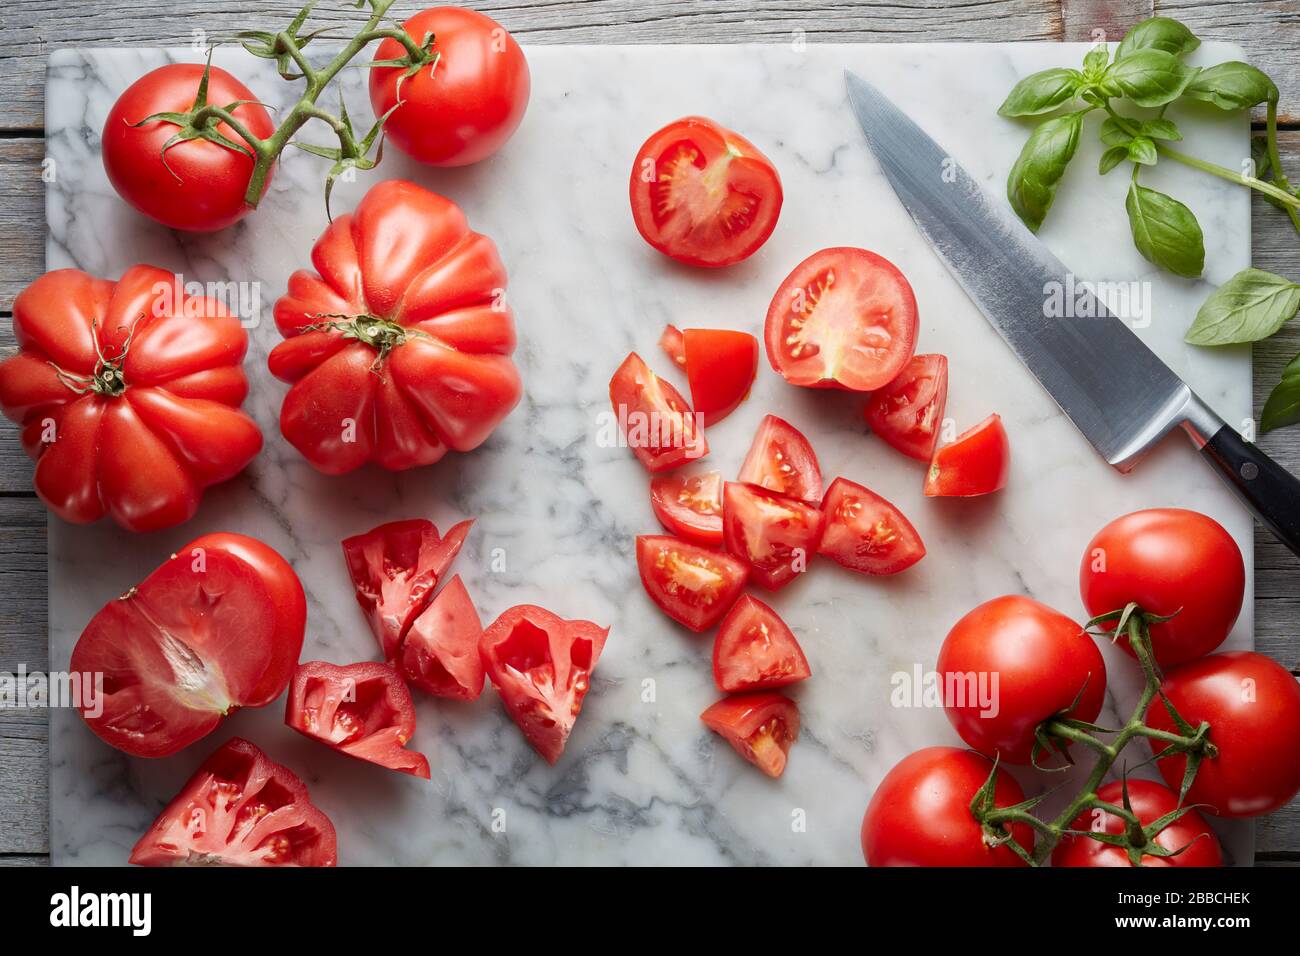 Tomatoes heritage gourmet preparation food, vegetable, salad, healthy, vegetarian, fresh, tomato, red, diet, delicious, organic, closeup, meal, Stock Photo